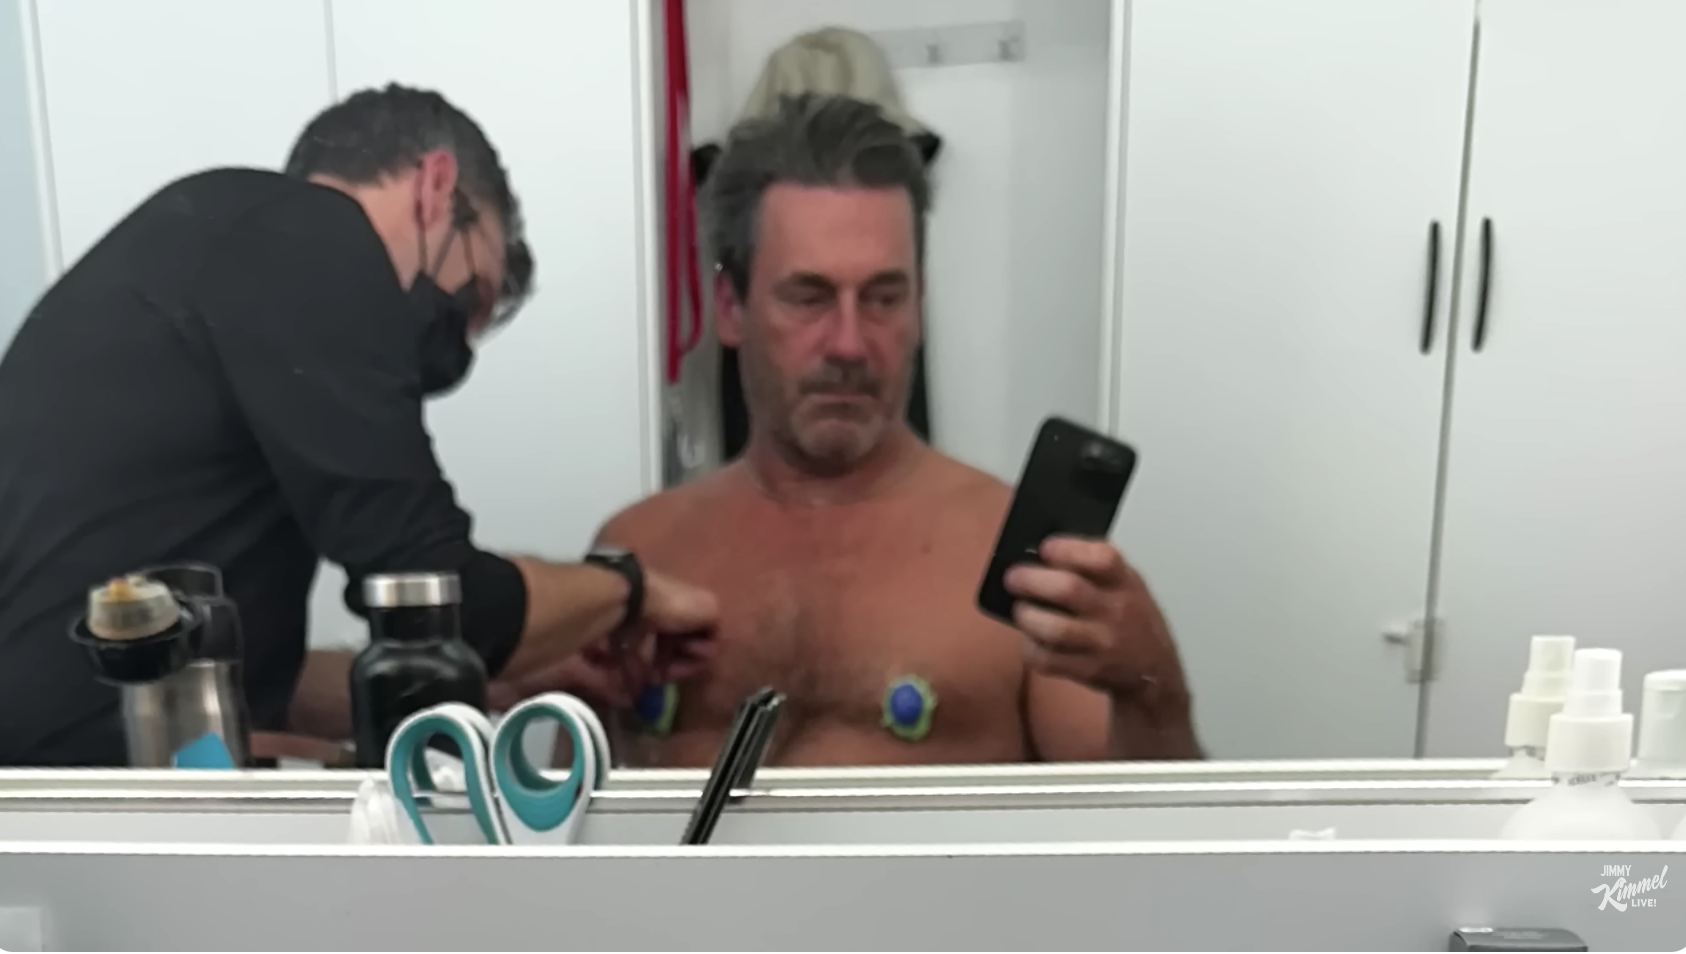 Jon taking a selfie while getting his nipples put on